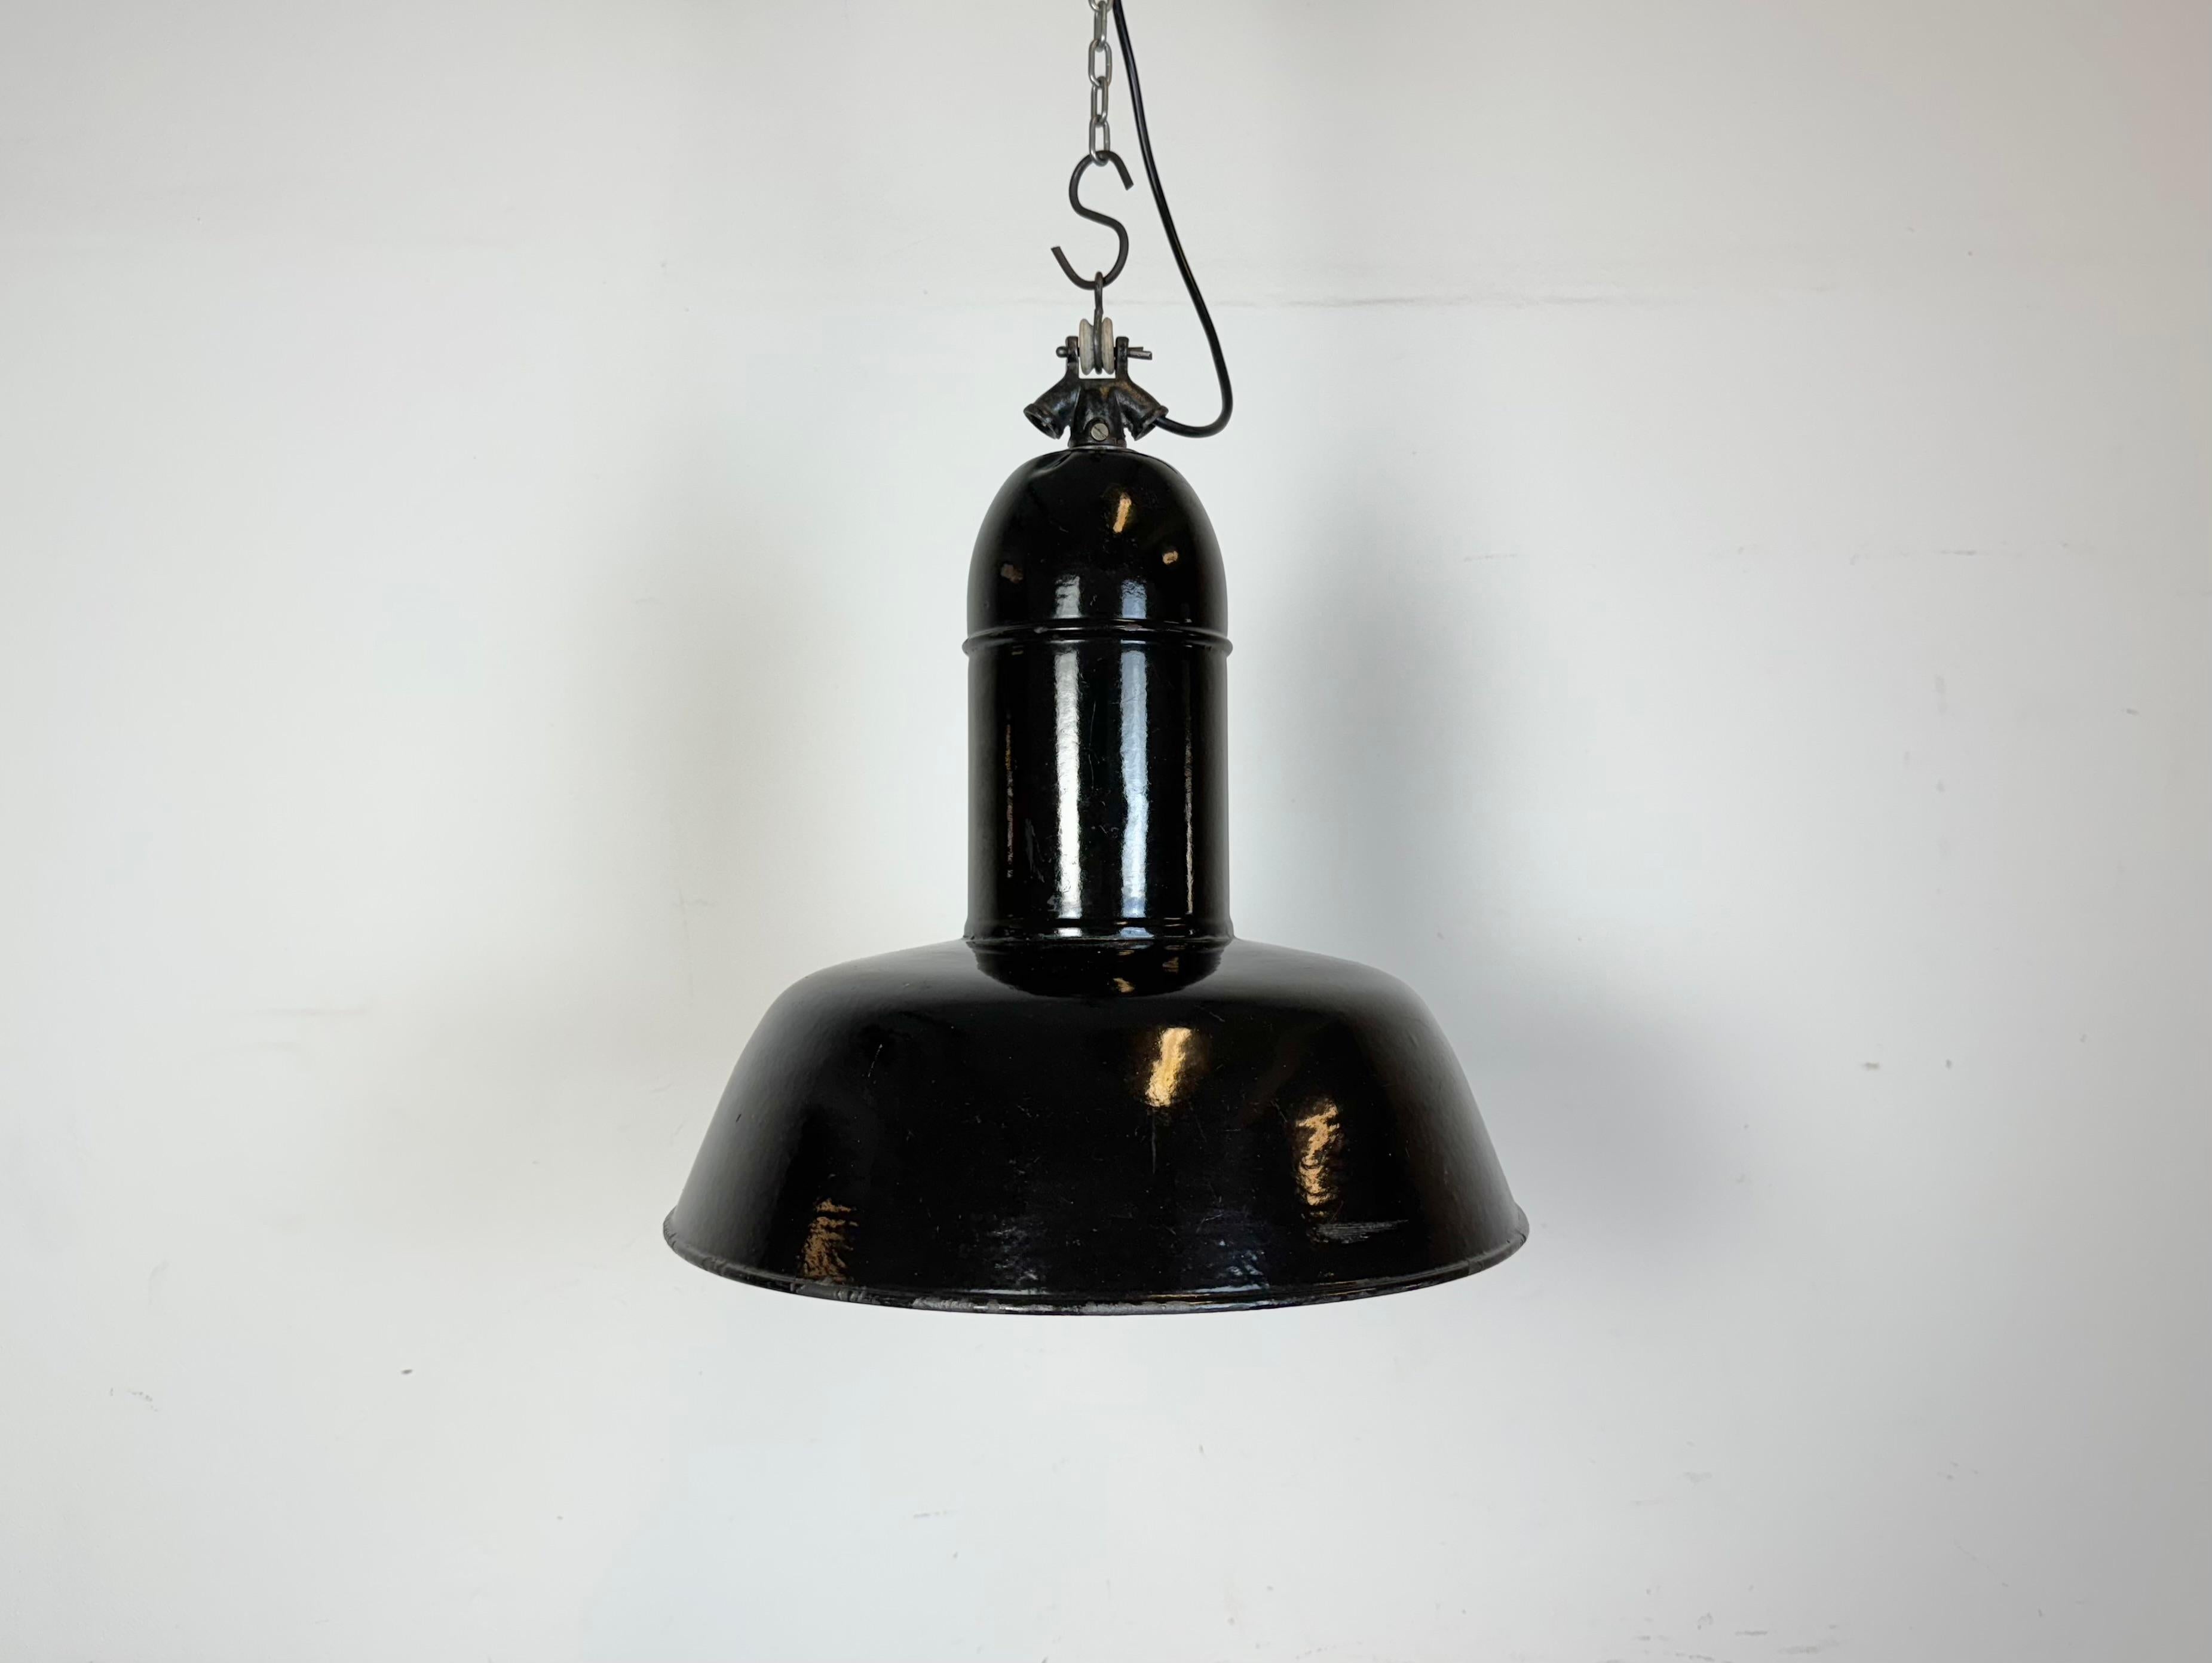 Industrial black enamel pendant light made in Germany during the 1930s. White enamel inside the shade. Cast iron top. The porcelain socket requires standard E 27/ E26 light bulbs. New wire. Fully functional. The weight of the lamp is 2 kg.